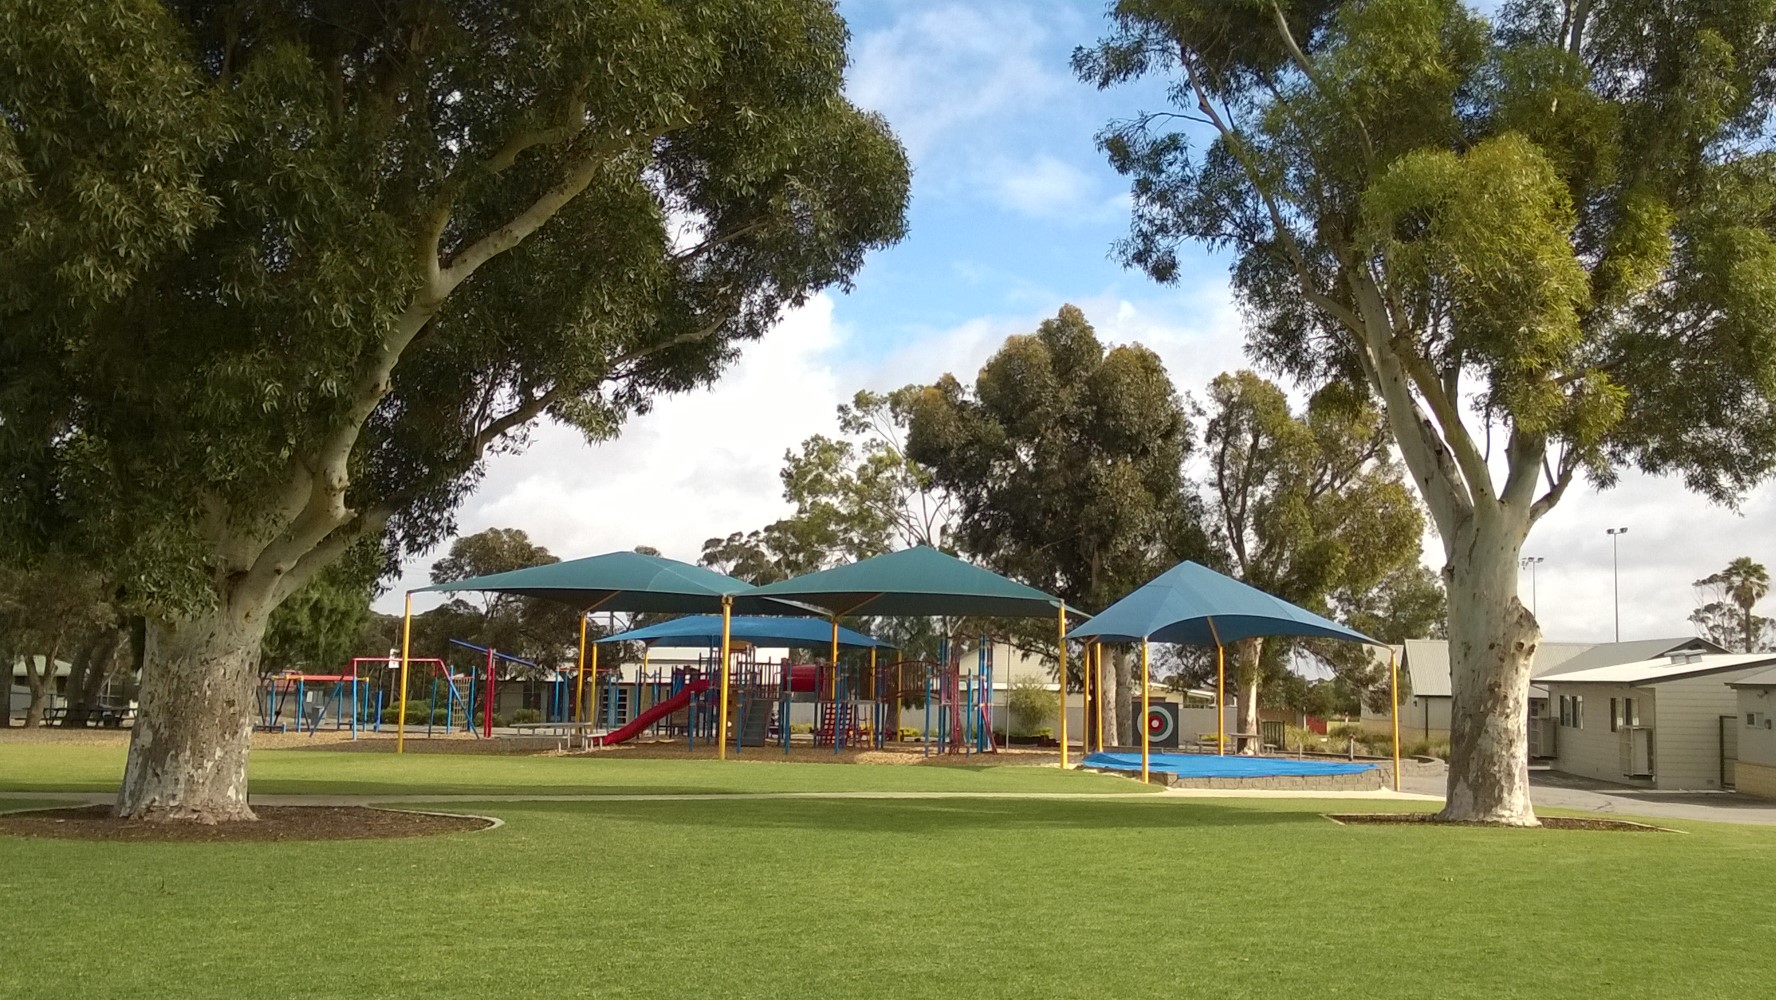 Photograph of play equipment with oval in the foreground